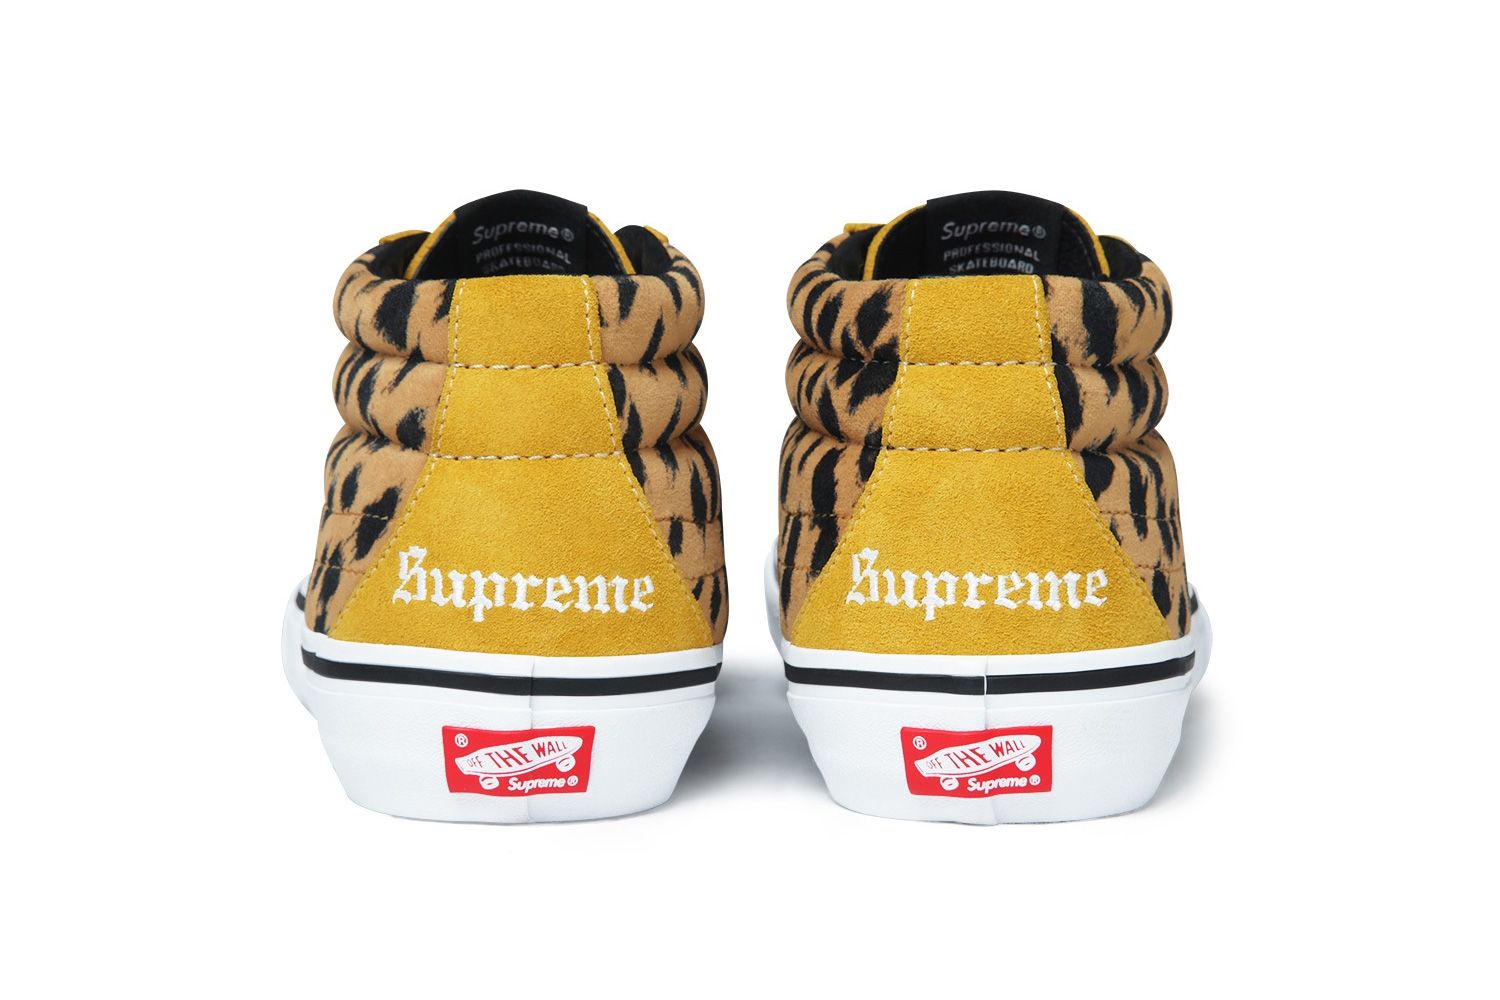 Stay tuned as we learn more about the upcoming Supreme x Louis